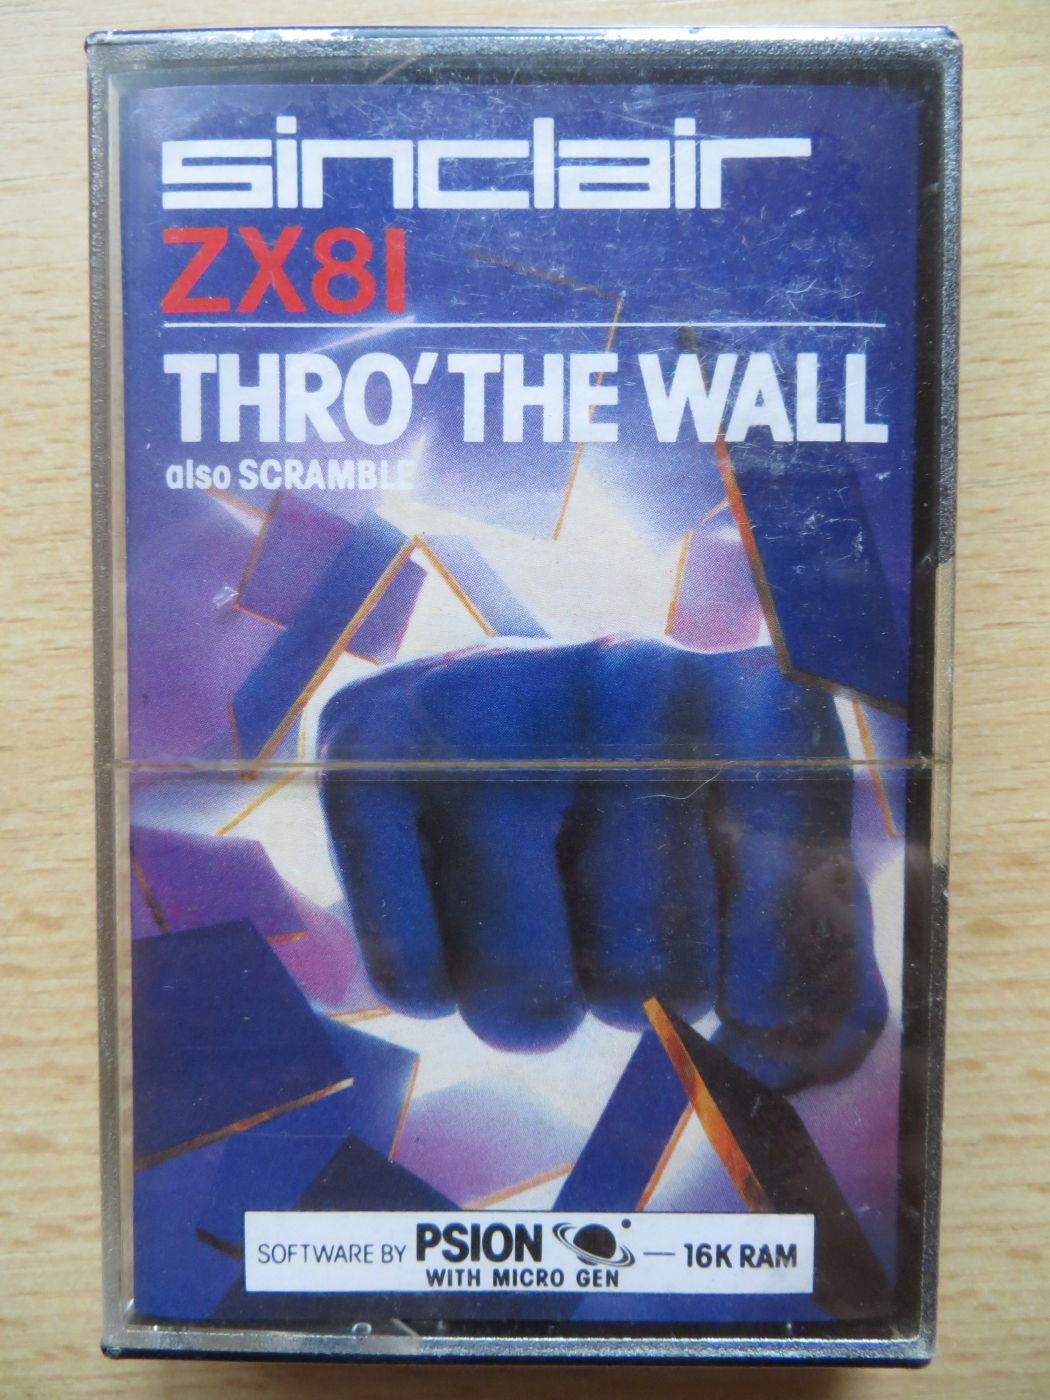 Thro' The Wall